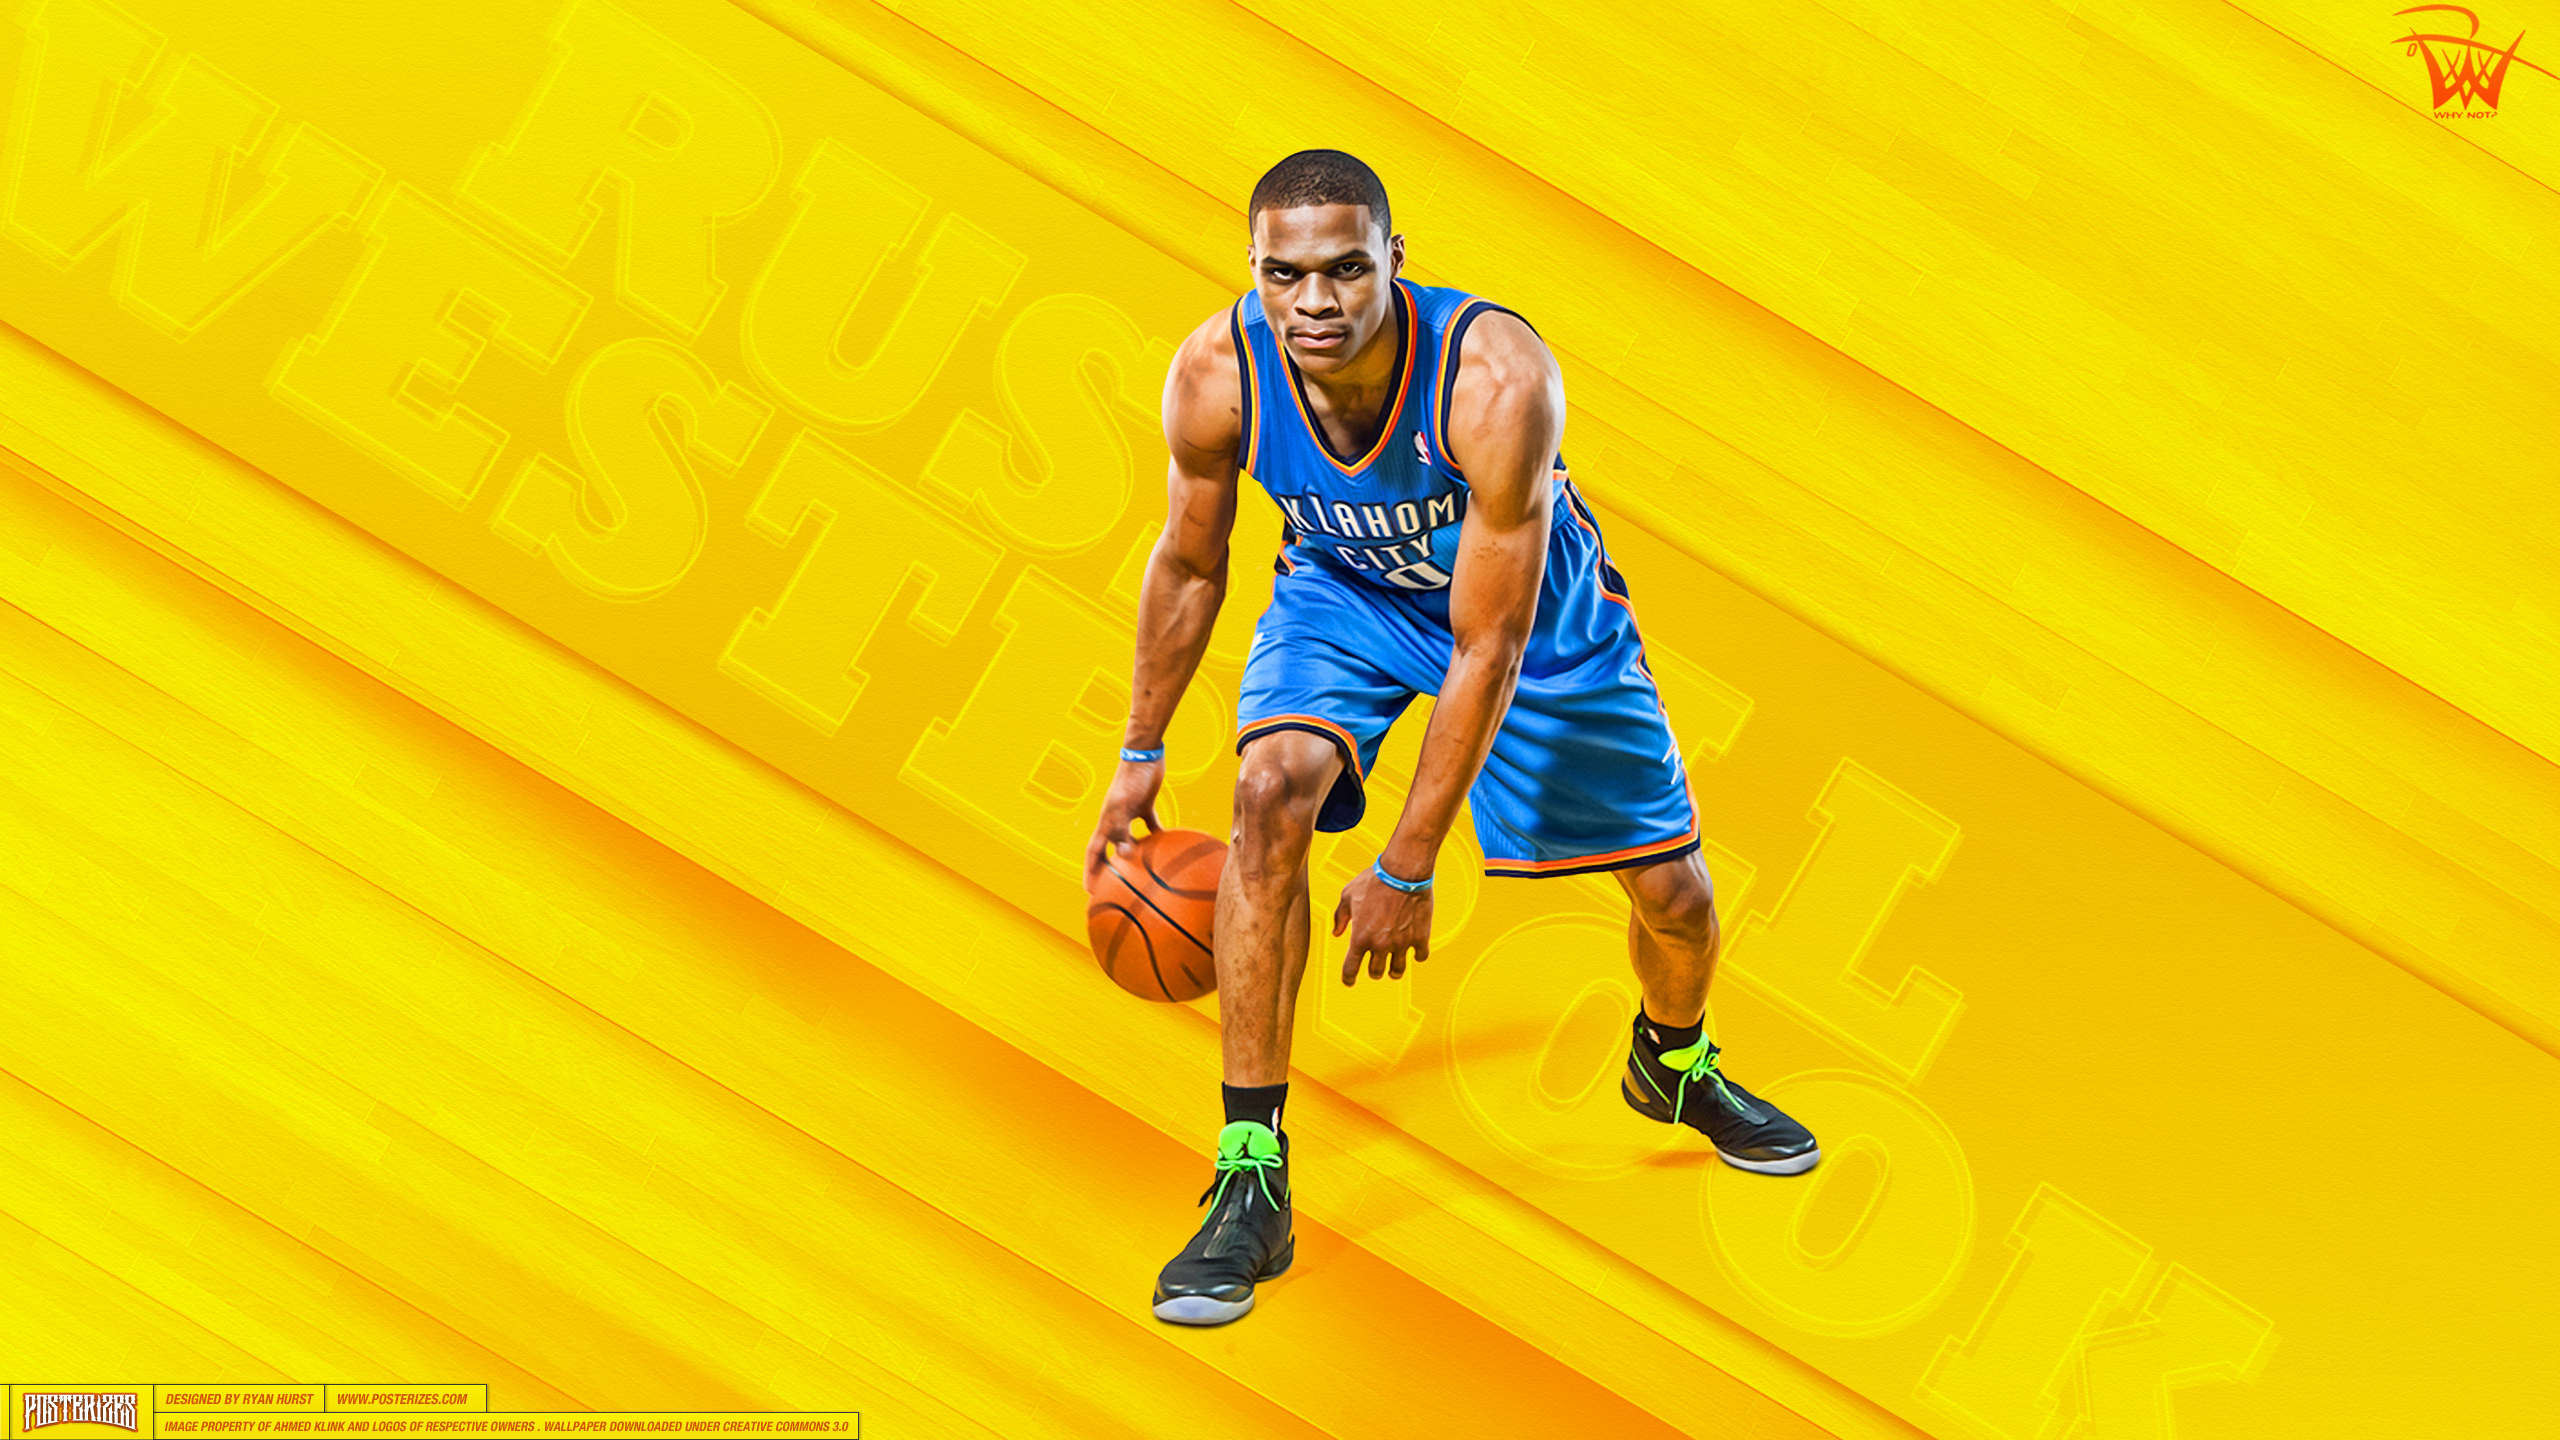 2560x1440 Free download Russell Westbrook Why Not Wallpaper Posterizes NBA [] for your Desktop, Mobile \u0026 Tablet | Explore 50+ Russell Westbrook Wallpapers | Kevin Durant Wallpaper, Stephen Curry Wallpaper, Russell Westbrook Dunk Wallpaper